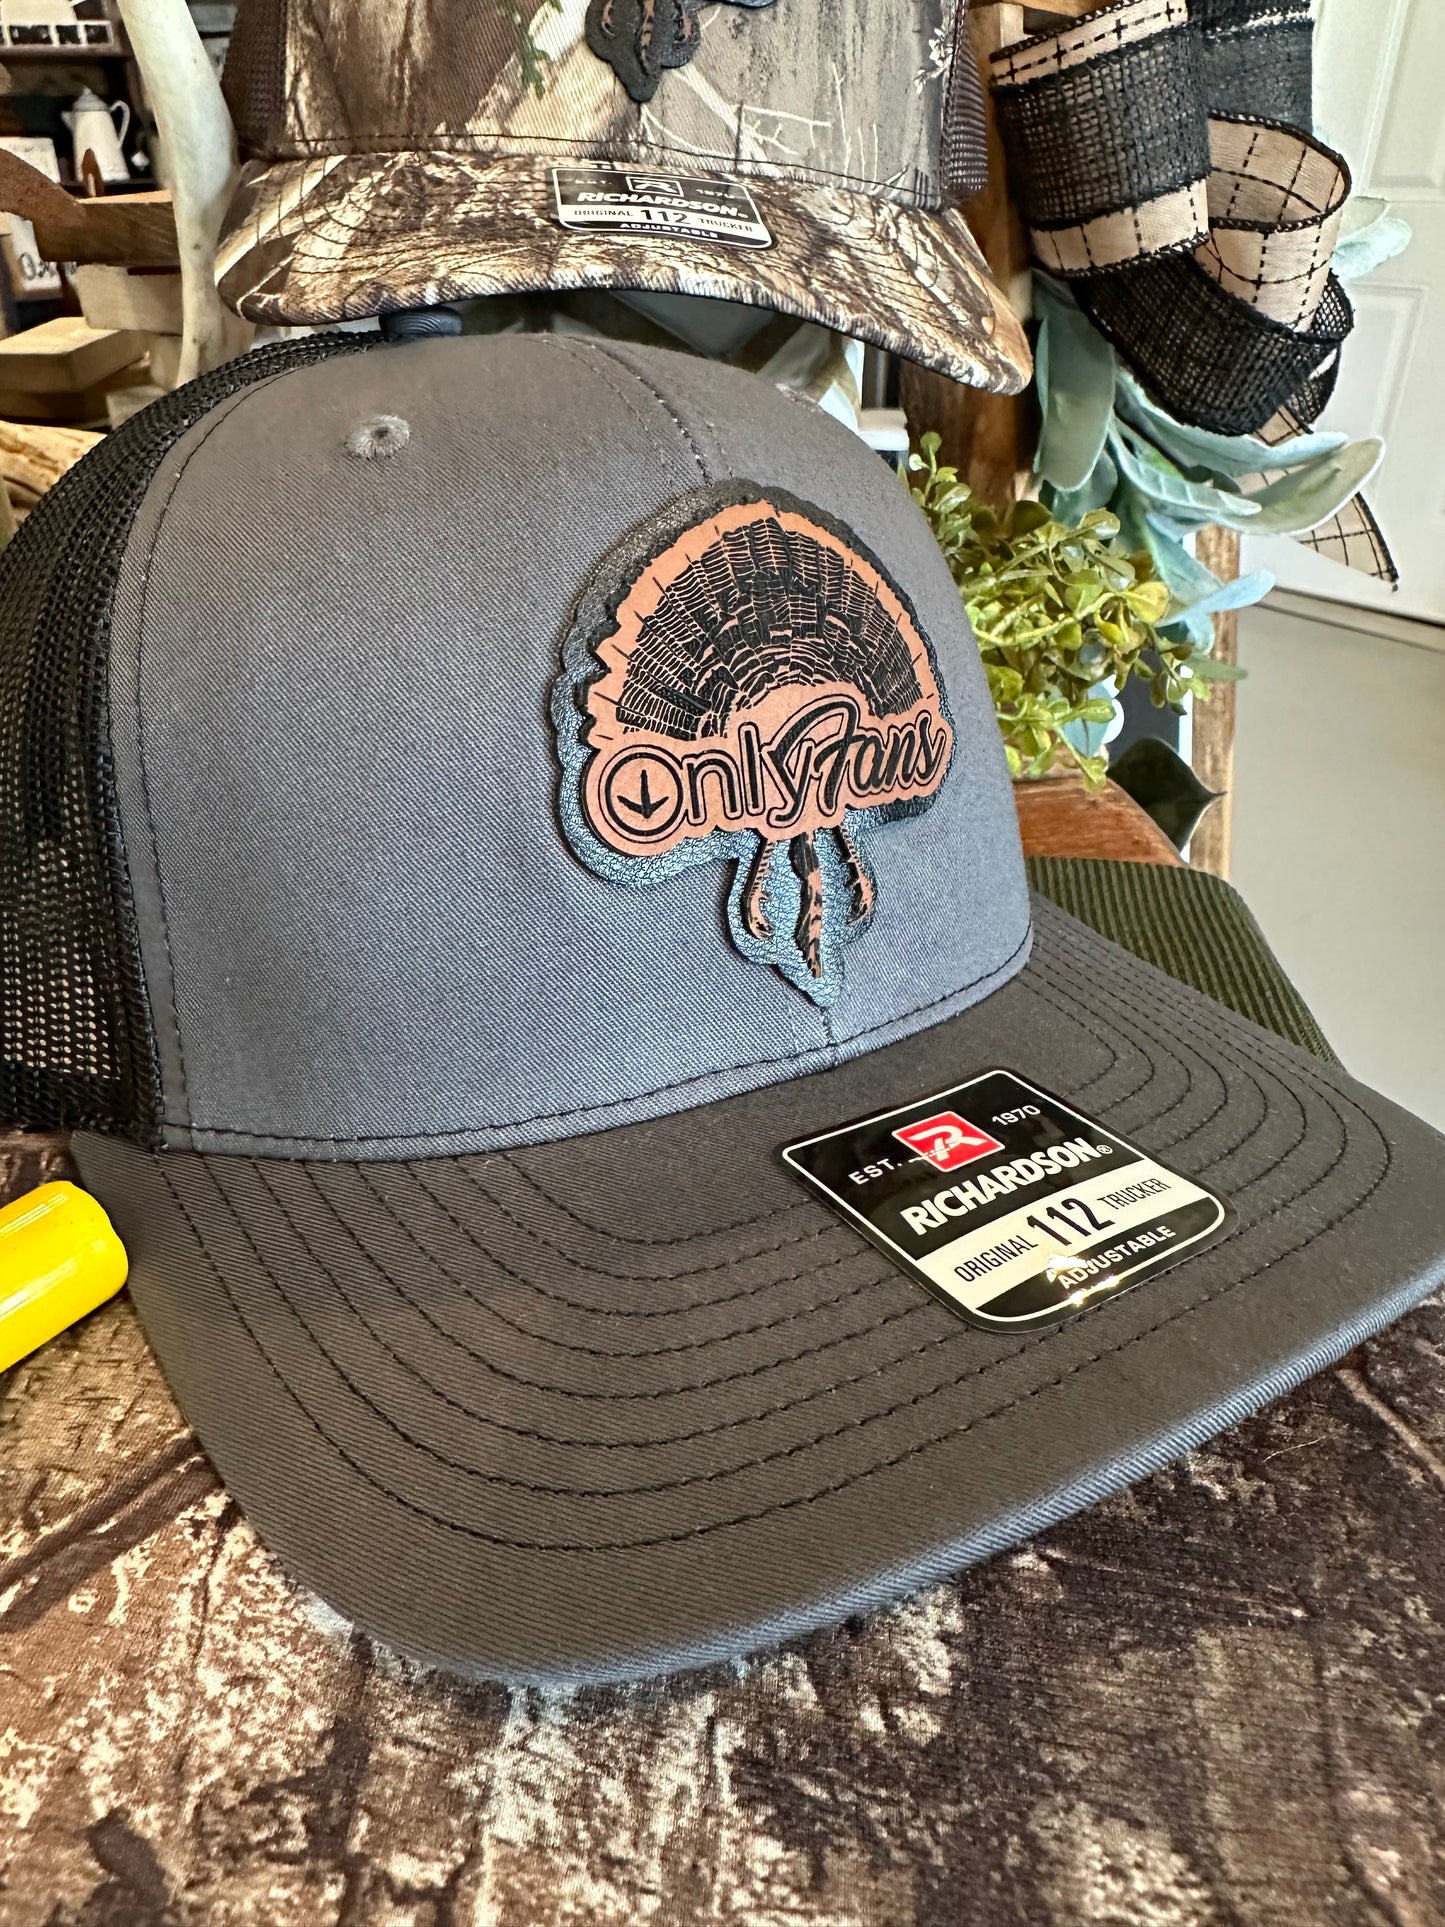 Only Fans Turkey Hunting Center Patch